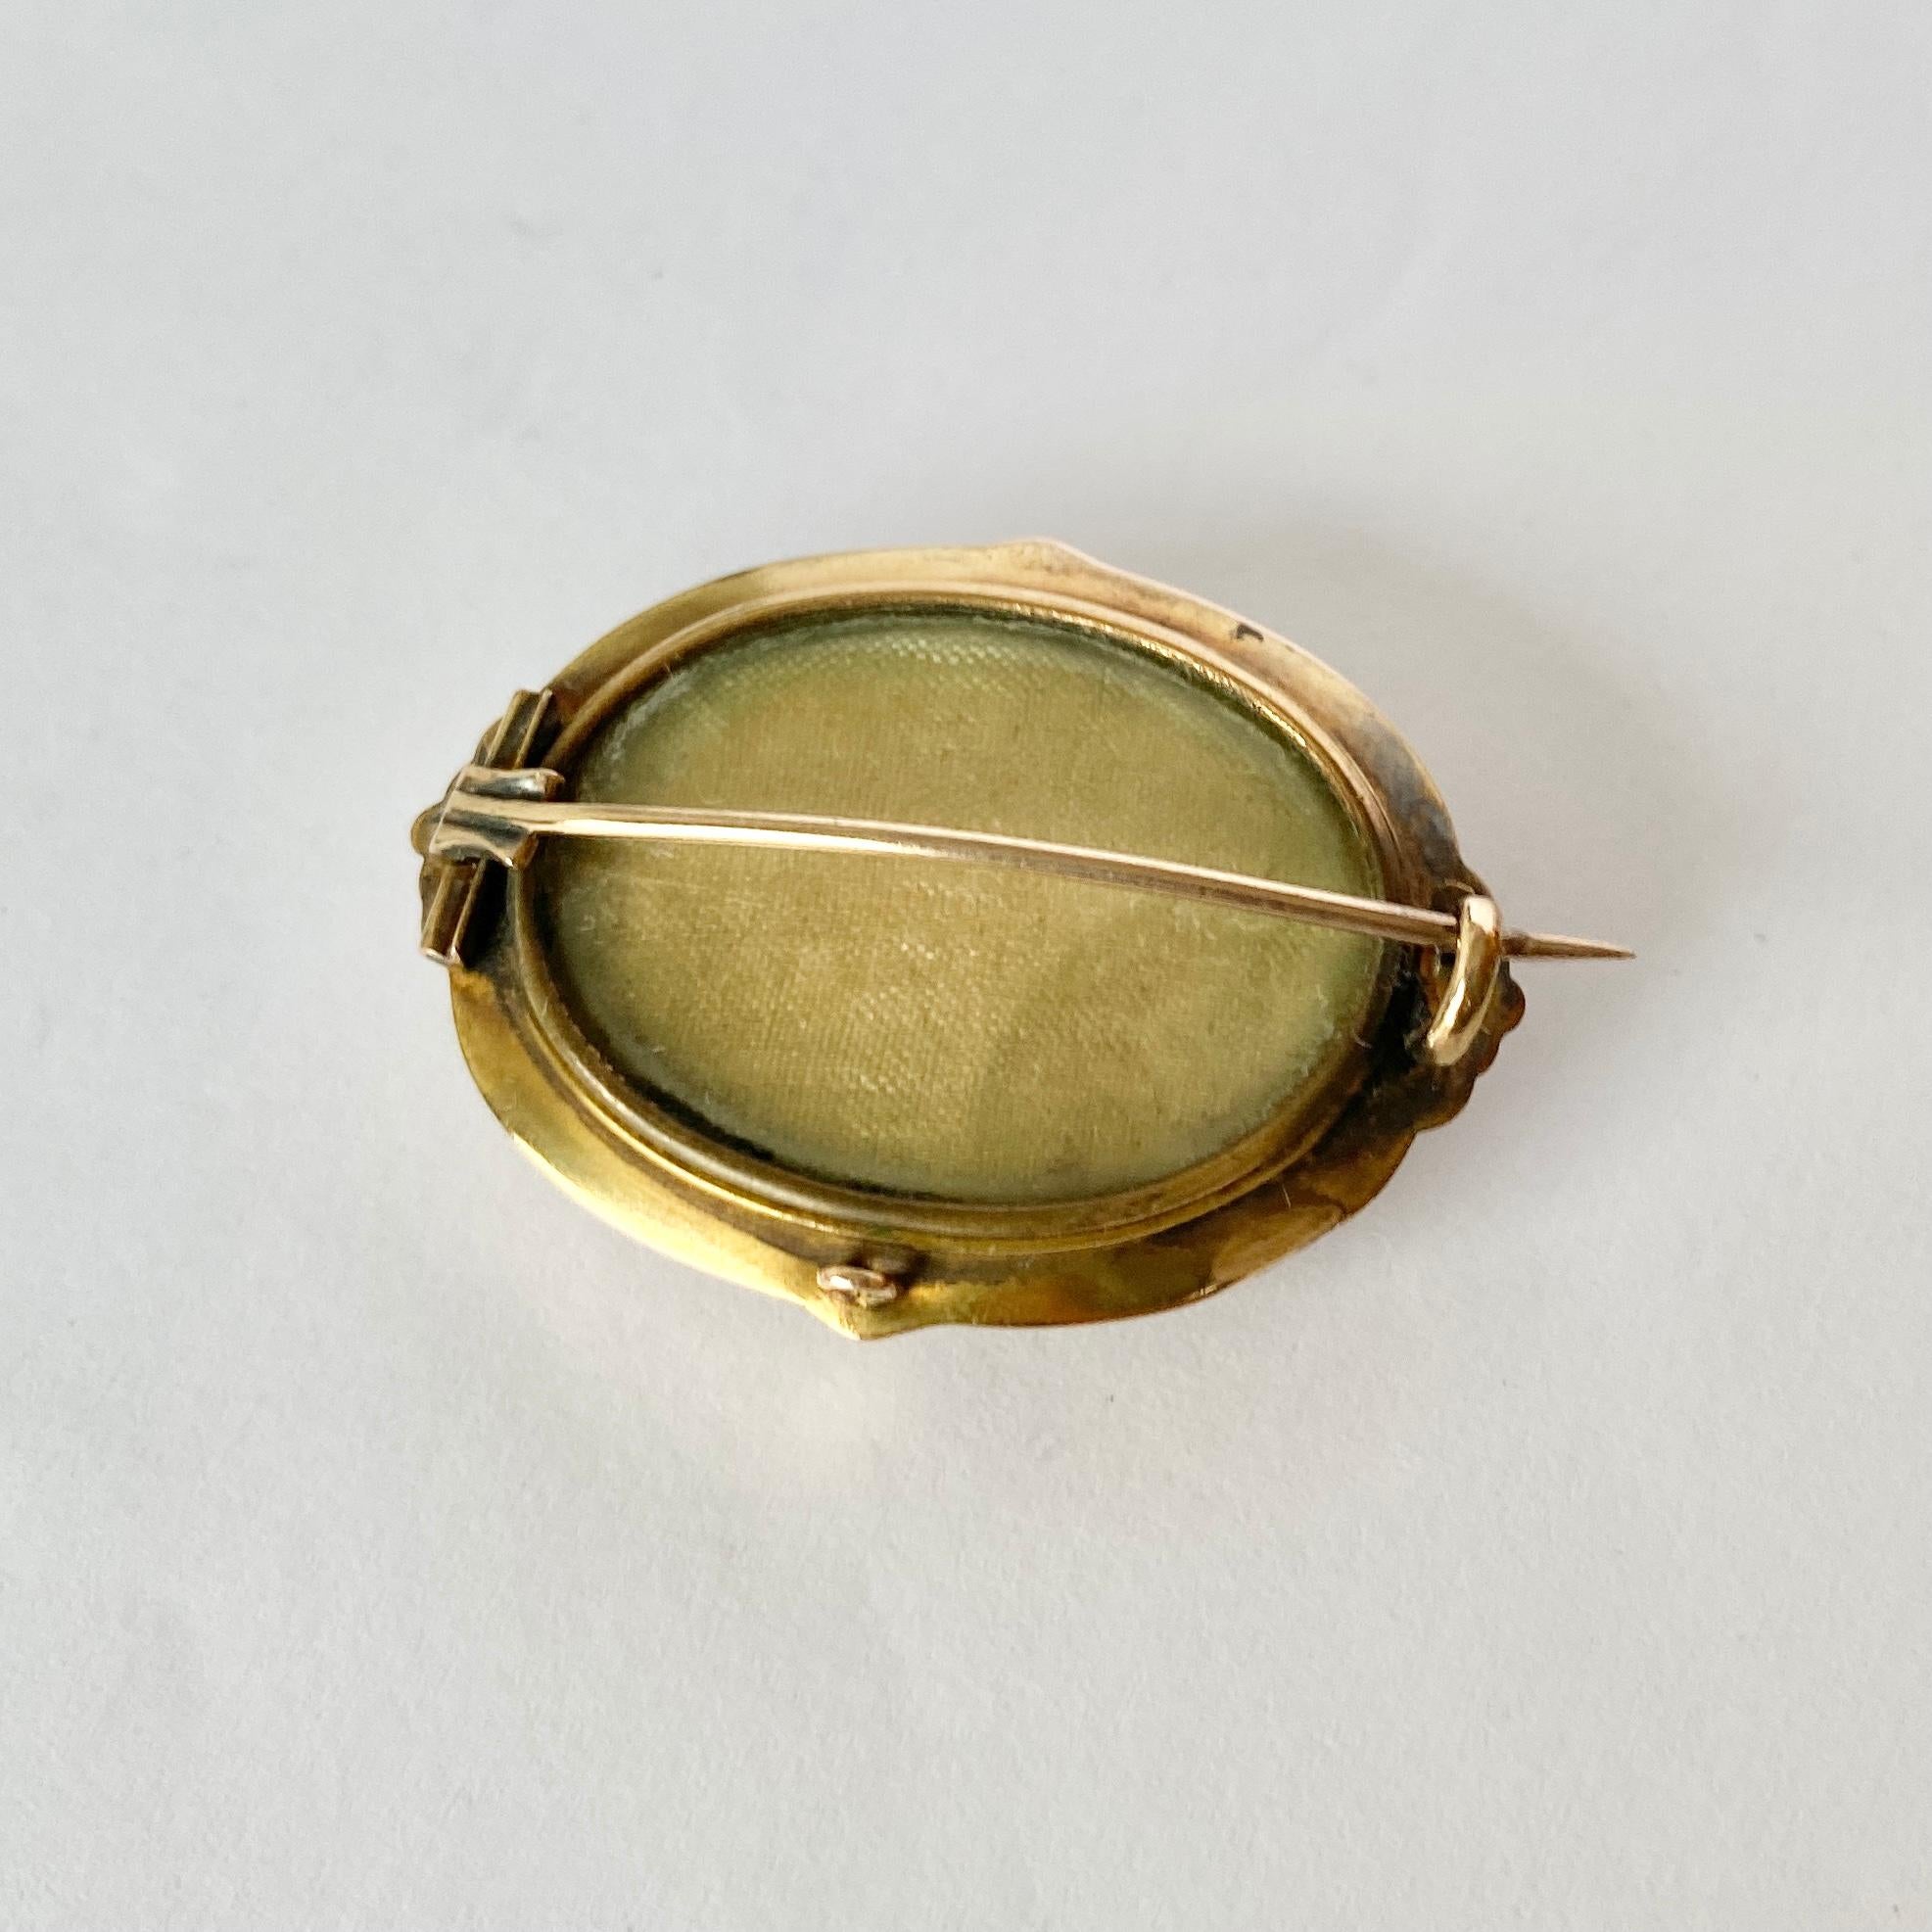 This gorgeous victorian brooch holds a rose cut diamond at the centre and is modelled in 18carat gold. The back of the locket has a pane of glass which created a locket. There is a pin on the back and also a loop so you can wear as a pendant.